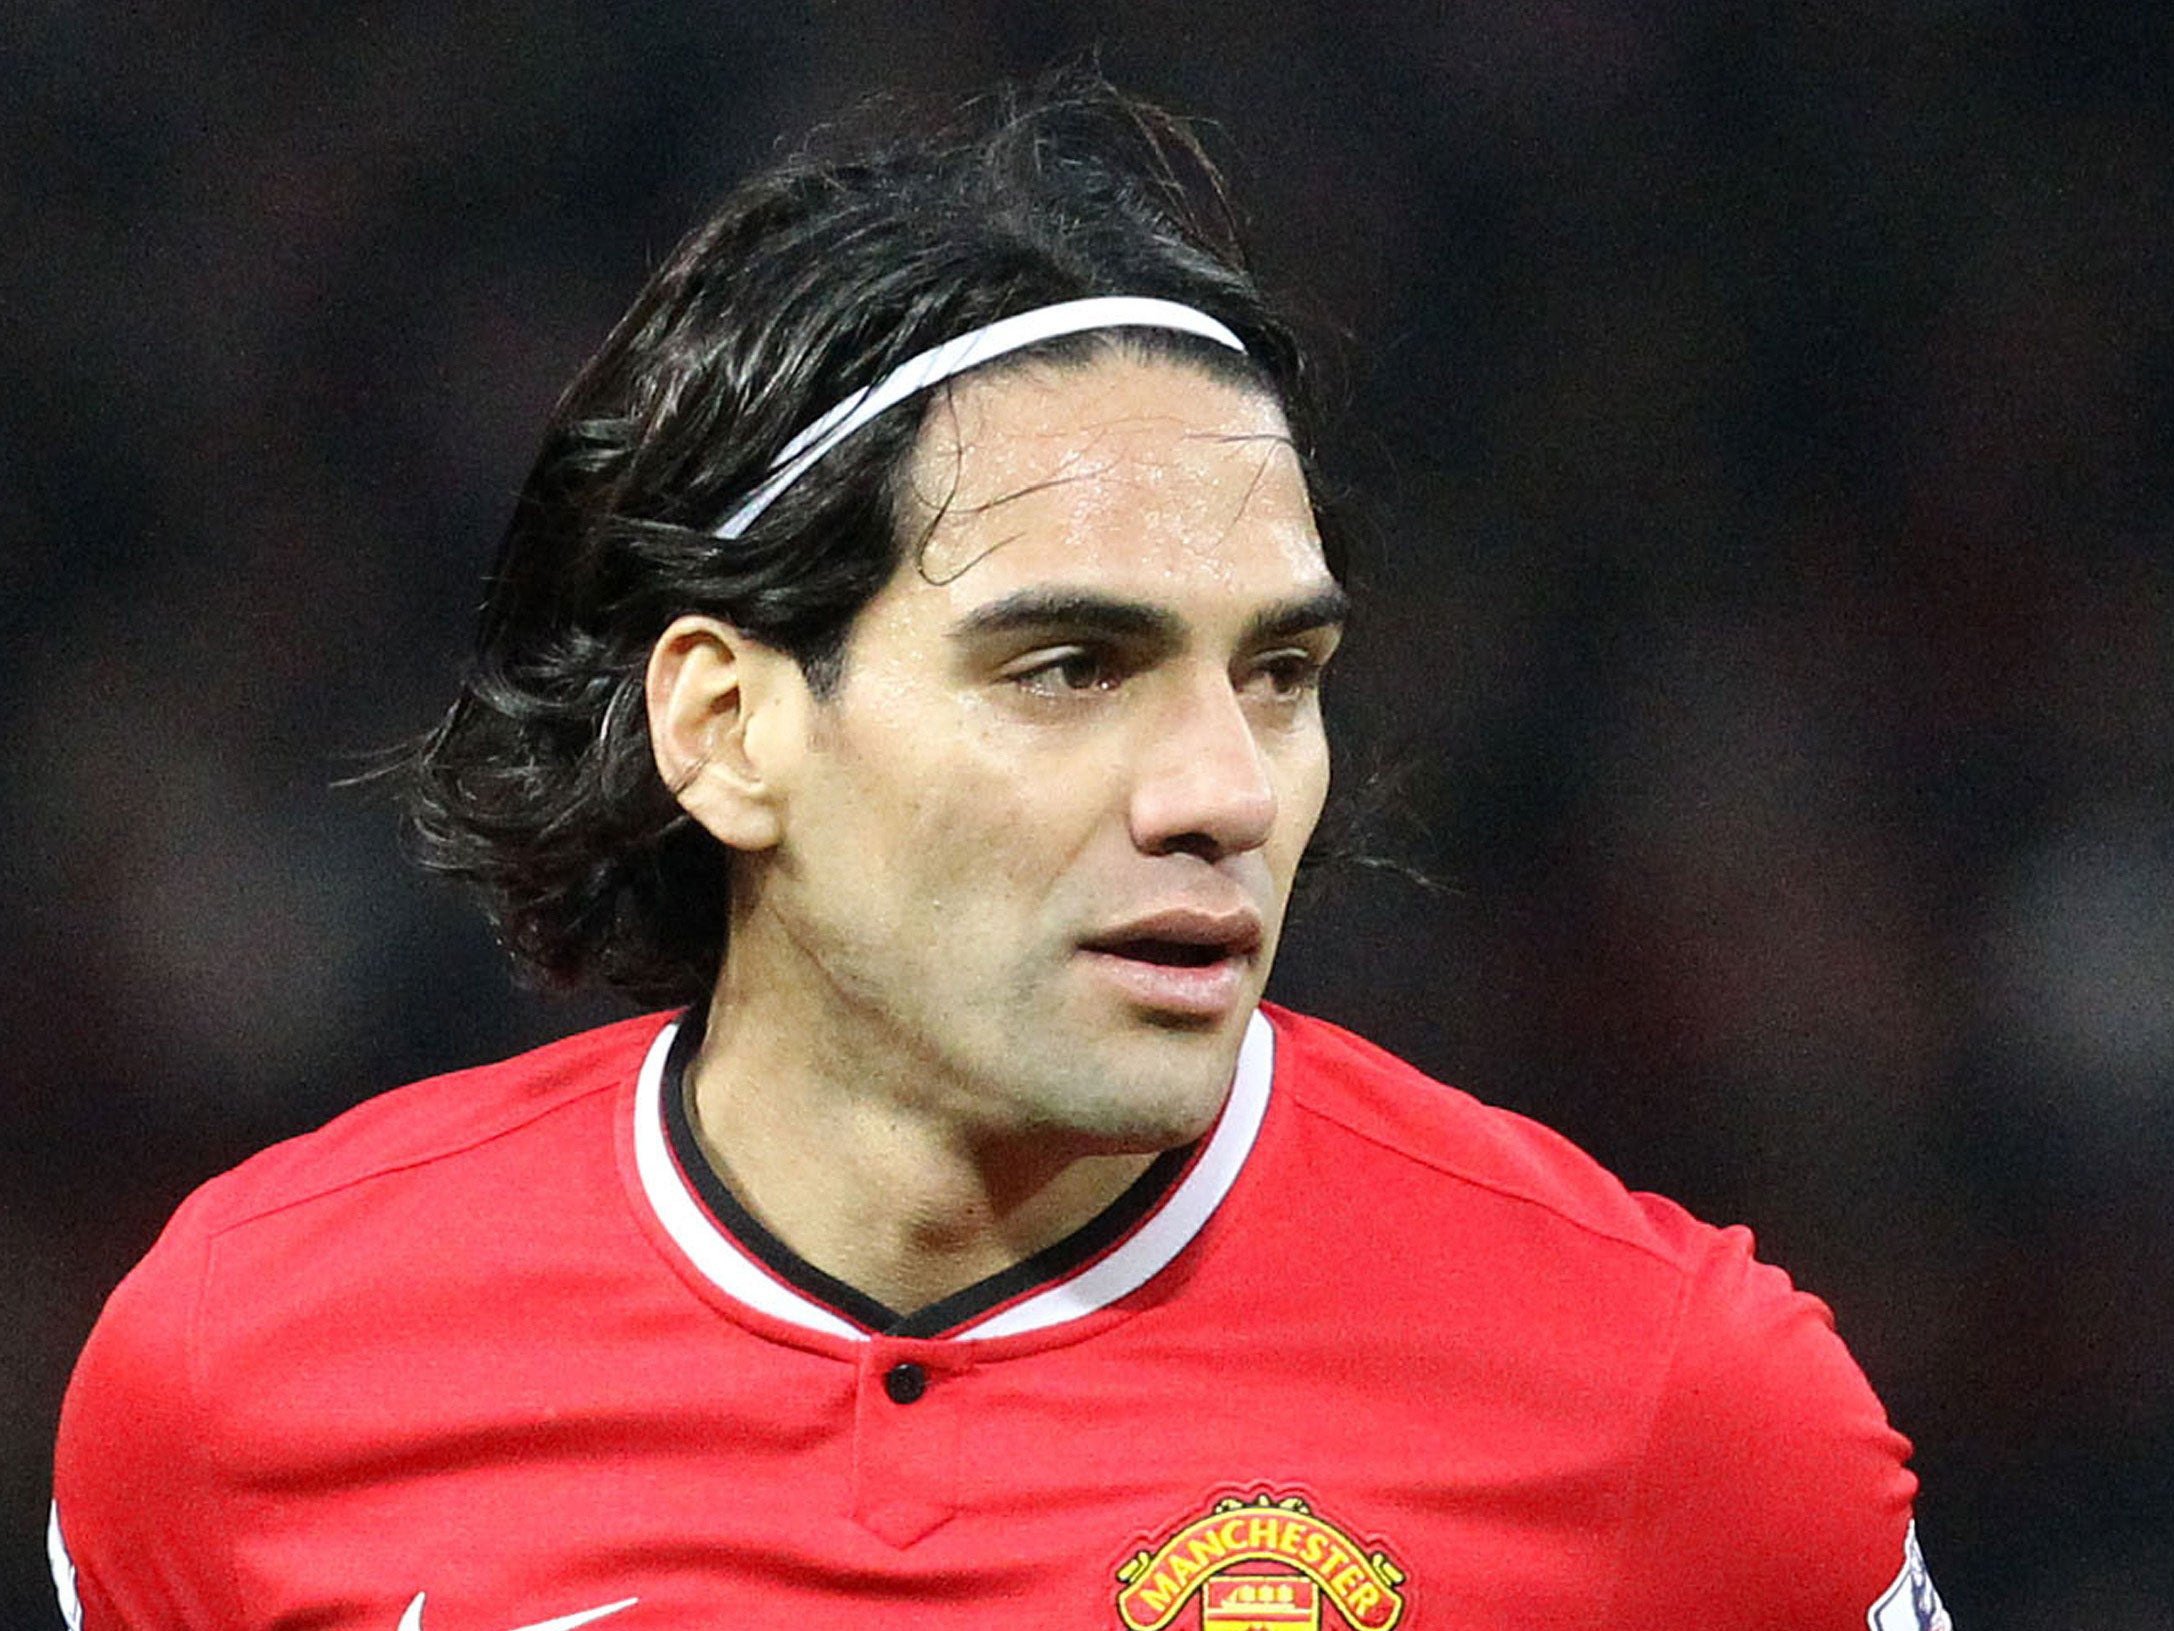 Radamel Falcao struggled at Manchester United, scoring four times in 29 appearances